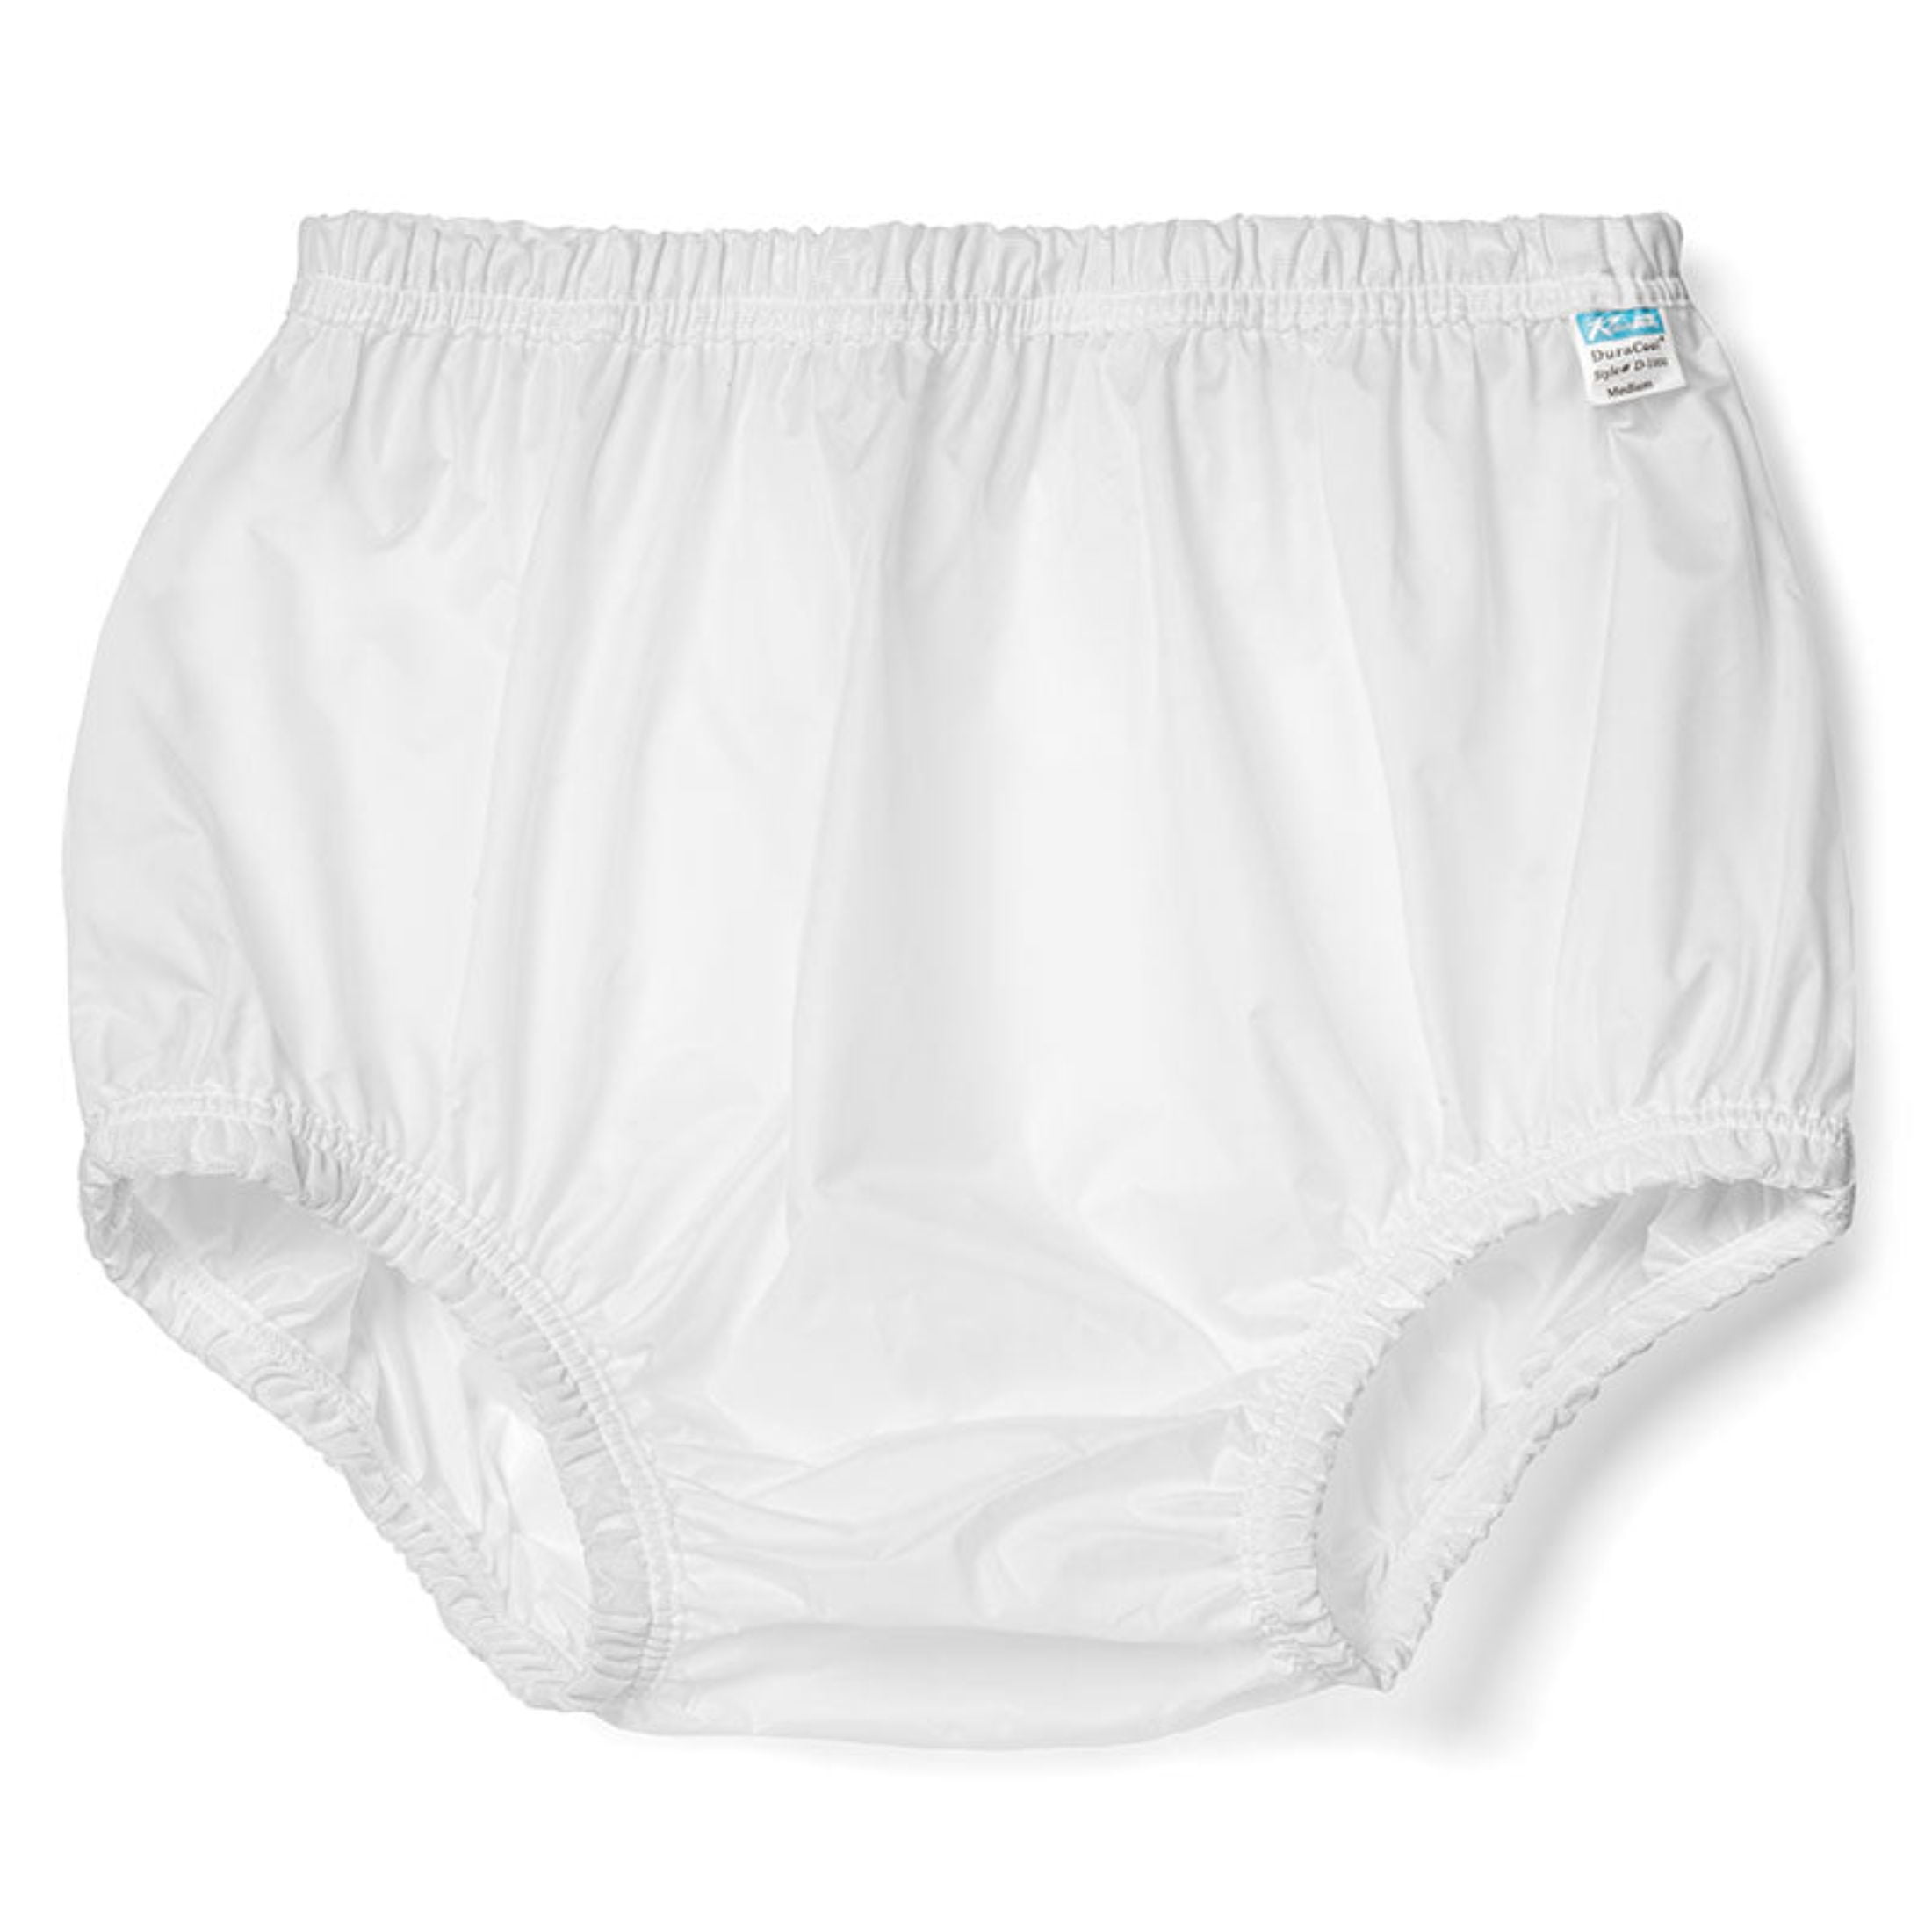 Unisex 100% Water-Proof Pull-On DuraCool® Nylon Incontinence Pant. Durable,  Soft & Cool Fabric Protects Clothing & Bed Linen. Wear Over  Diaper/Guards/Liners Or Pads. 